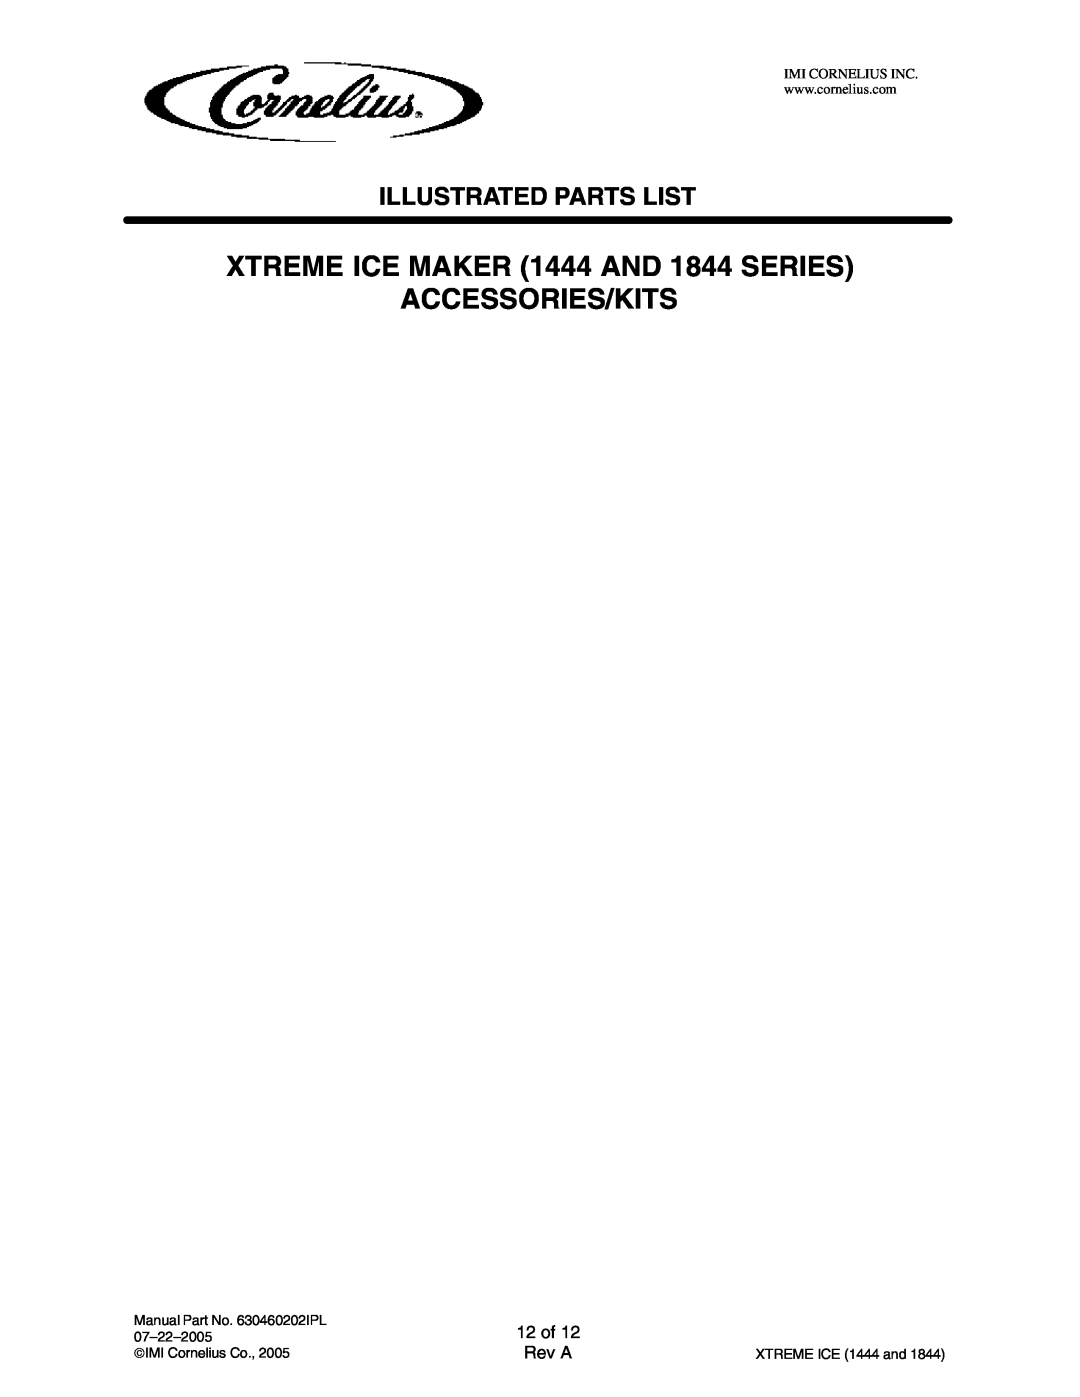 Cornelius 631814004 manual XTREME ICE MAKER 1444 AND 1844 SERIES ACCESSORIES/KITS, 12 of, Illustrated Parts List, Rev A 